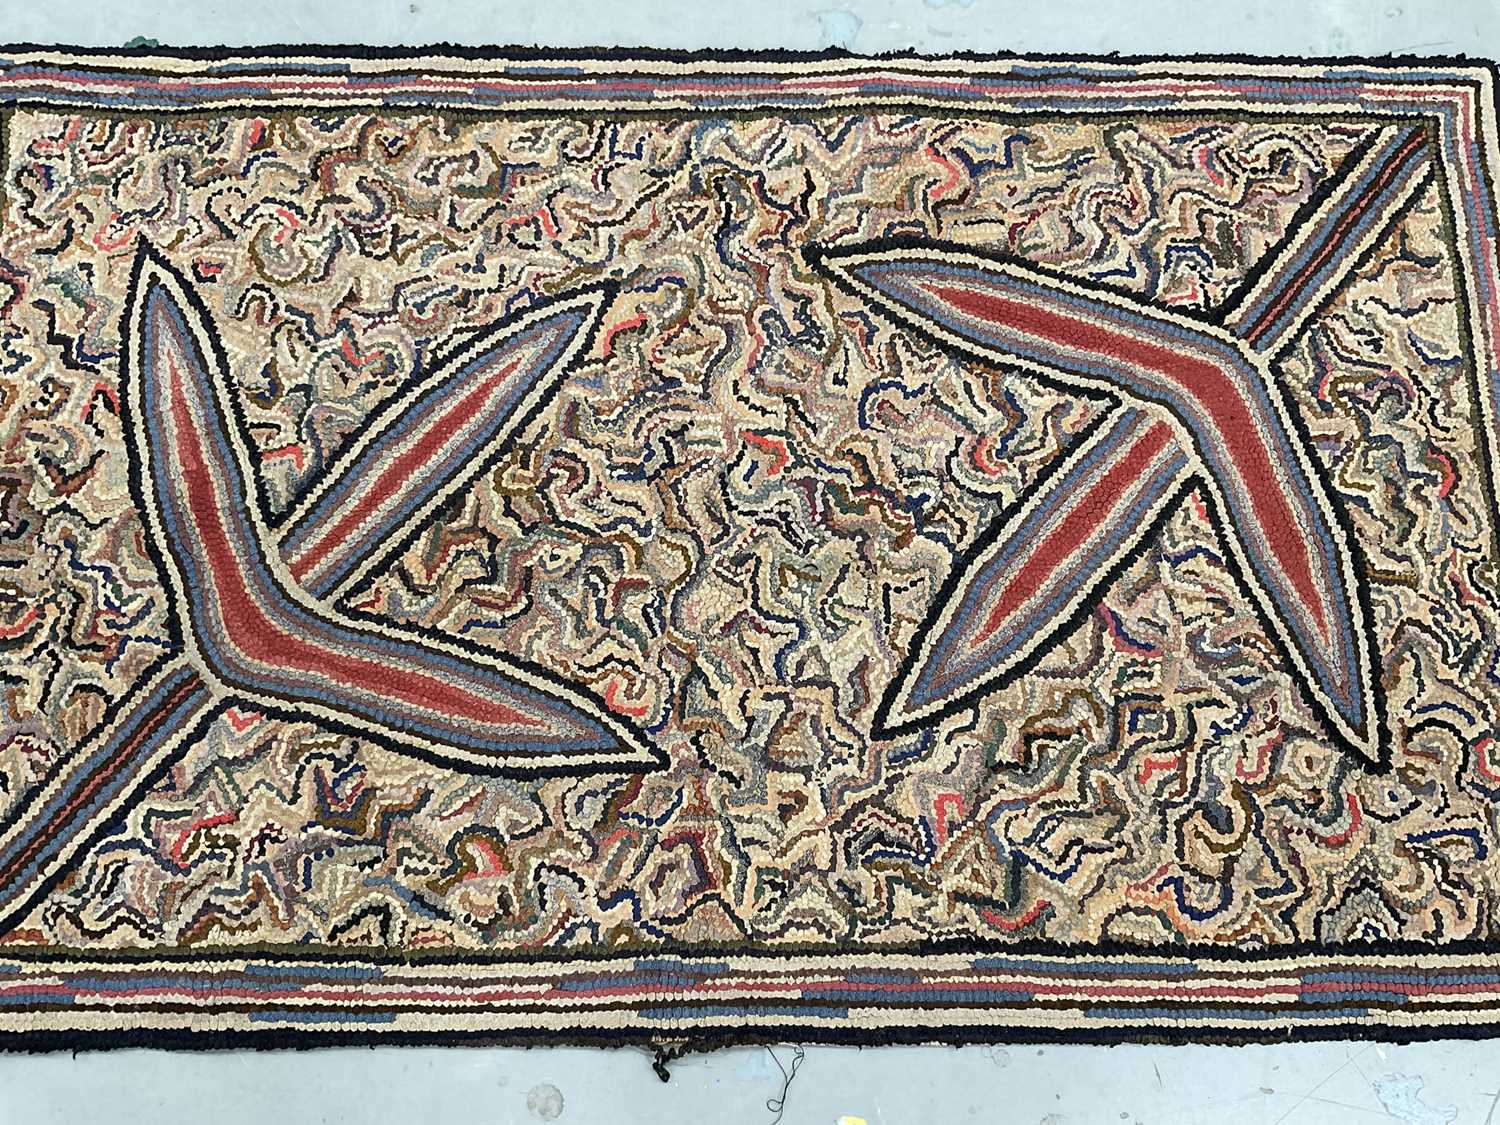 Omega style pair of hand woven rugs with abstract design, 132 x 82cm - Image 4 of 6